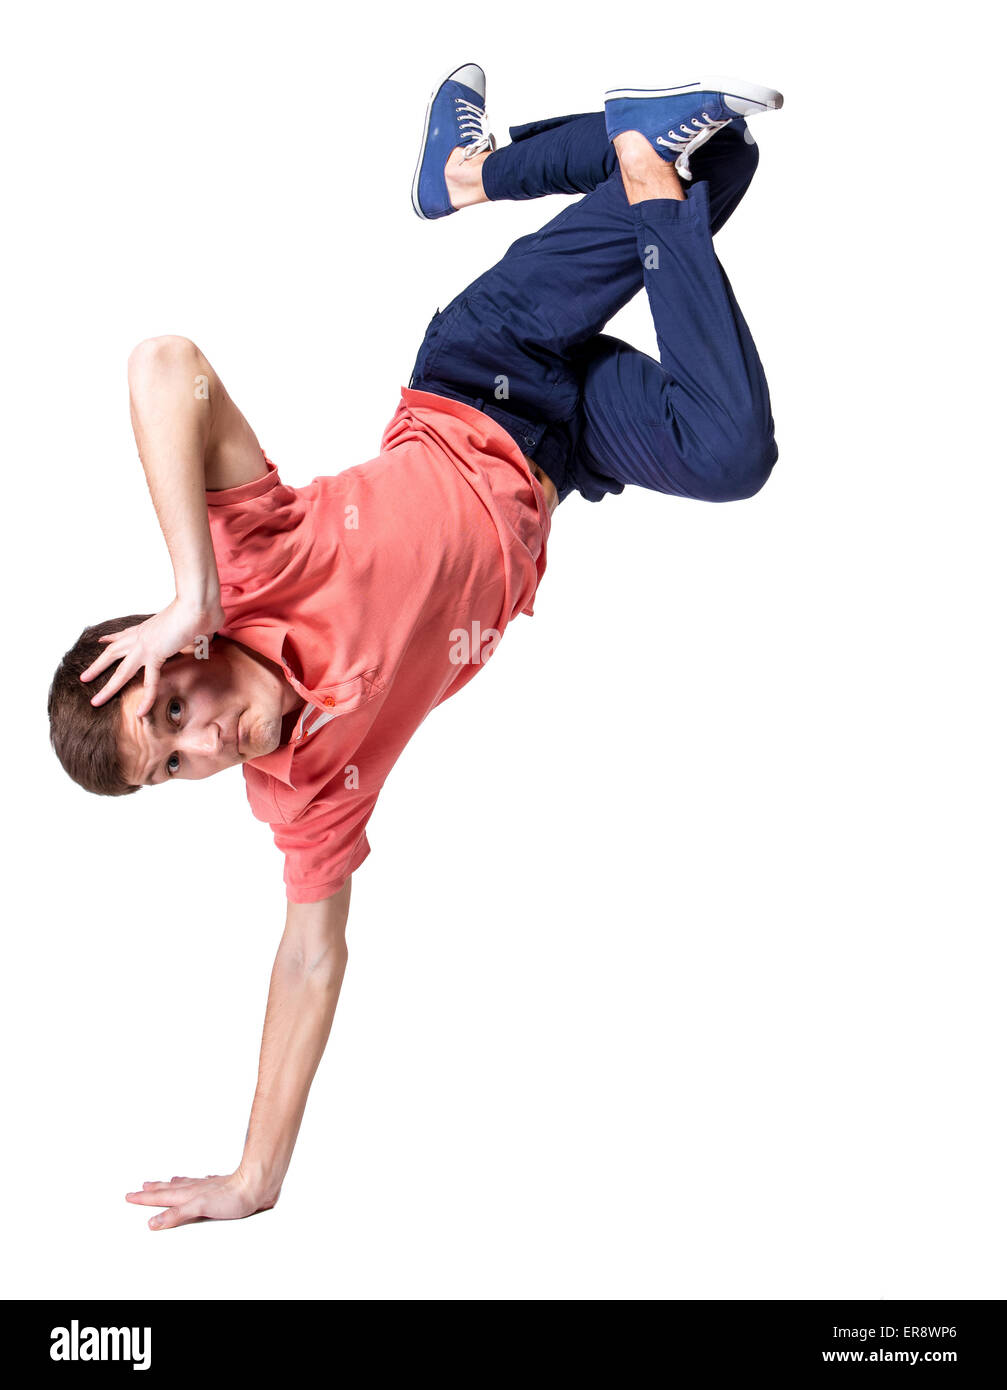 Break dancer doing one handed handstand against a white background Stock Photo